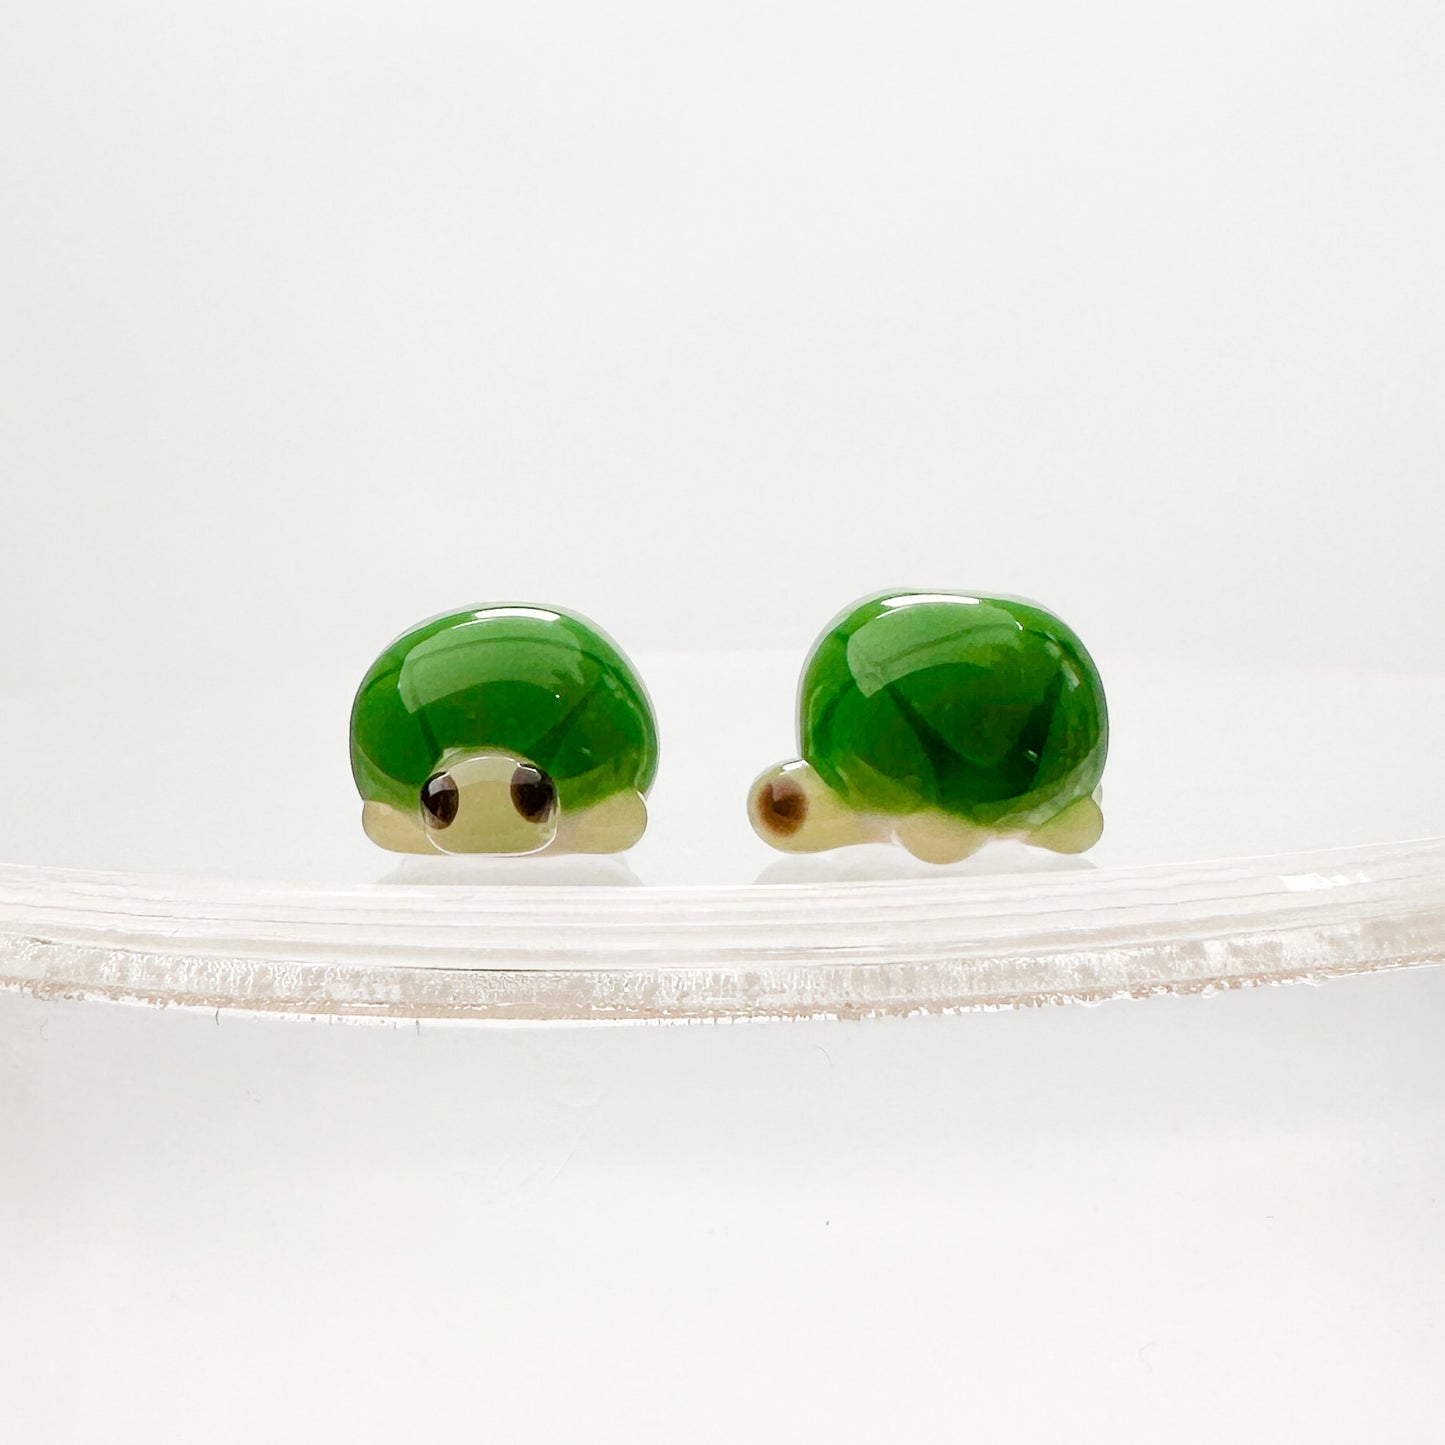 Chibi Handmade Glass Beads - Turtle (2 Colors Available) - 1 pc.-The Bead Gallery Honolulu